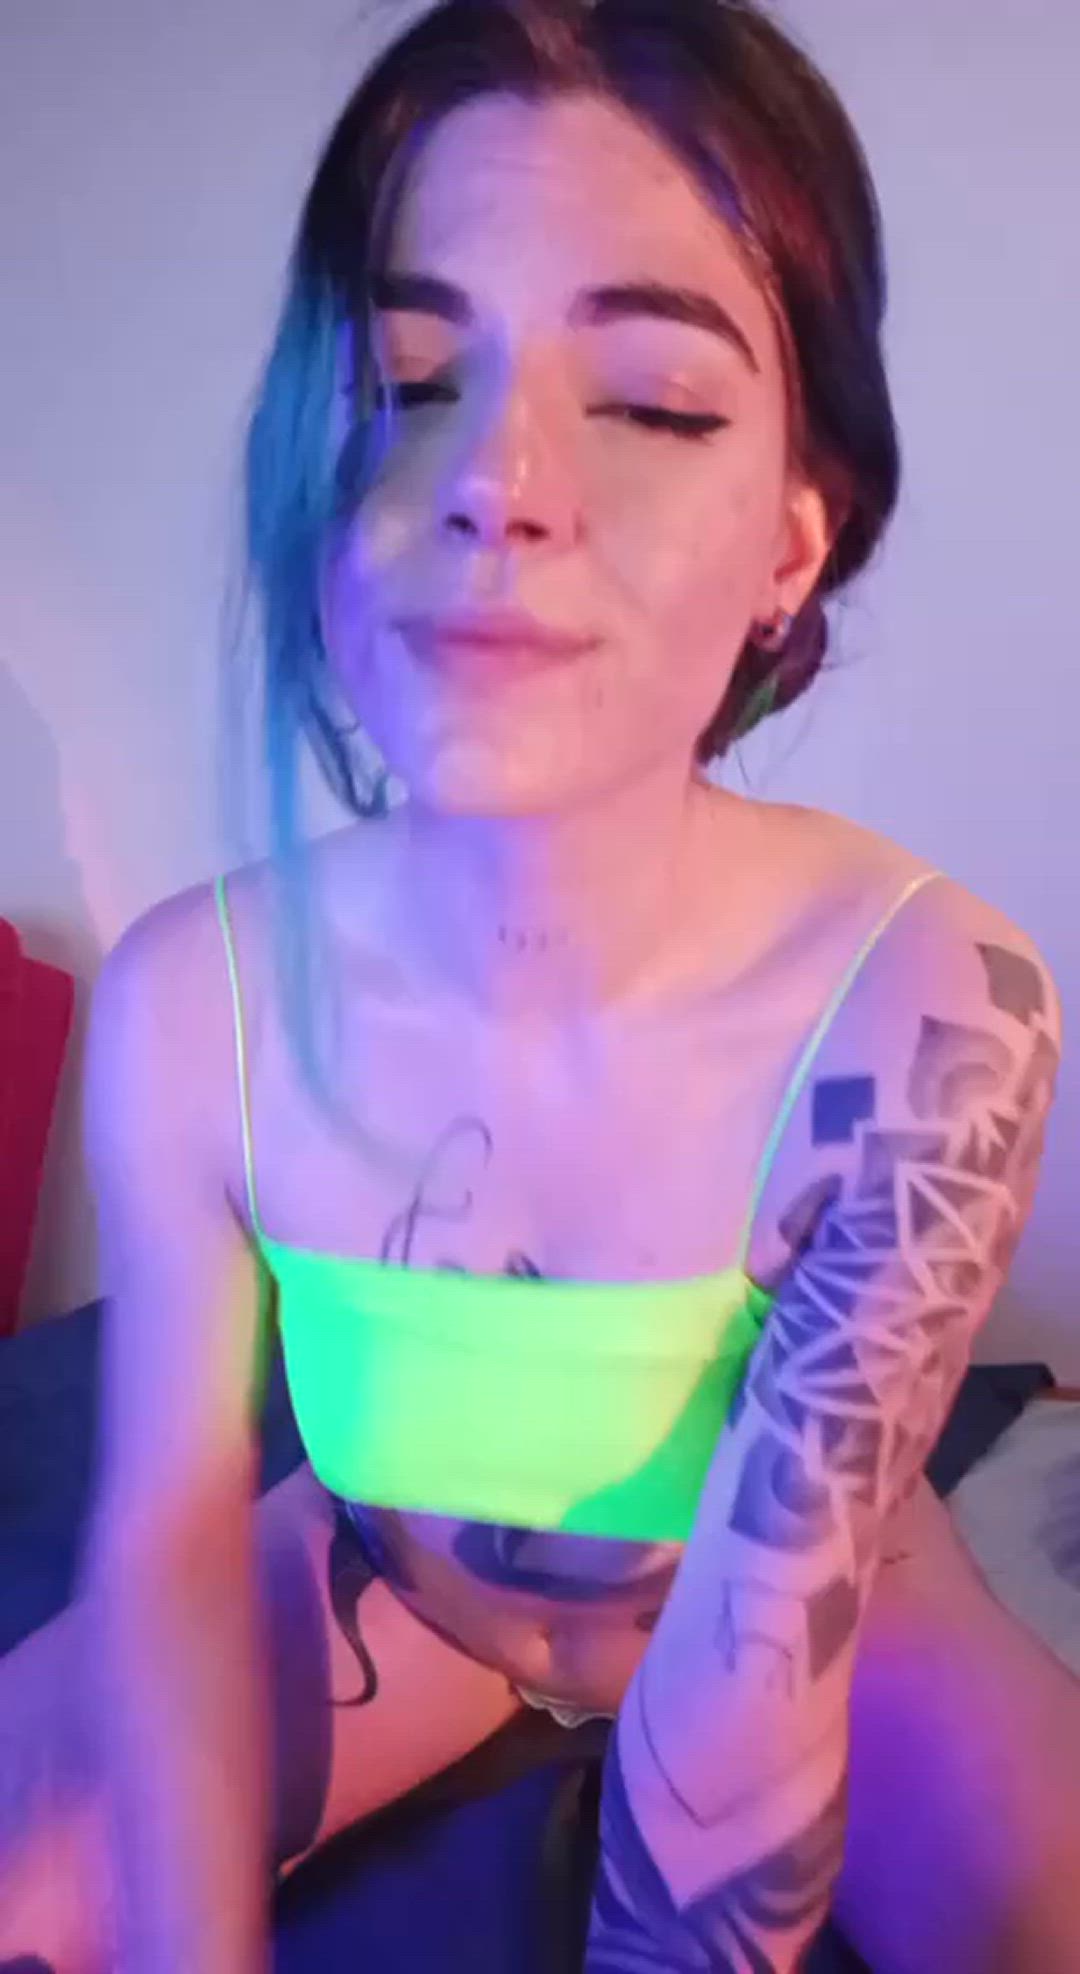 Tits porn video with onlyfans model silverhaze <strong>@silver.haze</strong>